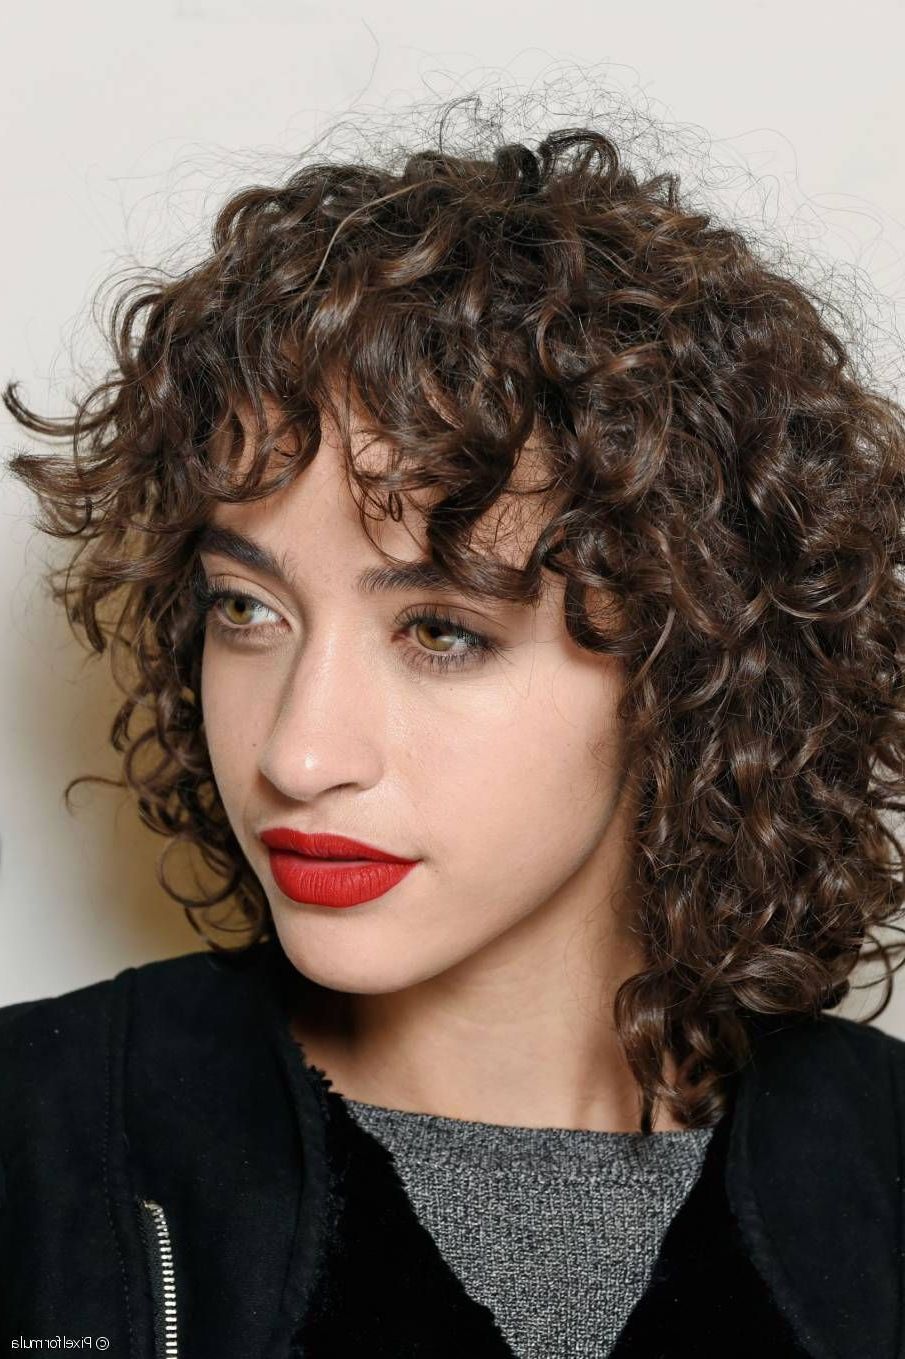 Curly Hair Styles Naturally Pertaining To Most Recently Released Wavy Hairstyles With Short Blunt Bangs (View 15 of 20)